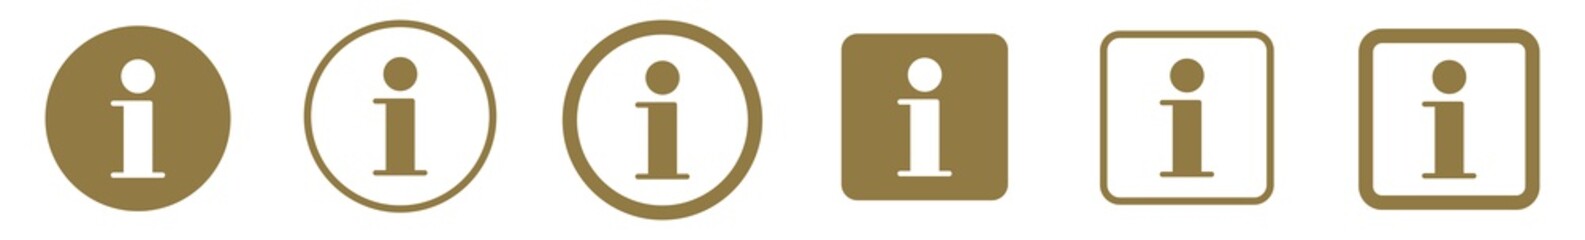 Info Point Icon Gold | Information Illustration | i Point Symbol | Help Logo | Hint Sign | Isolated | Variations